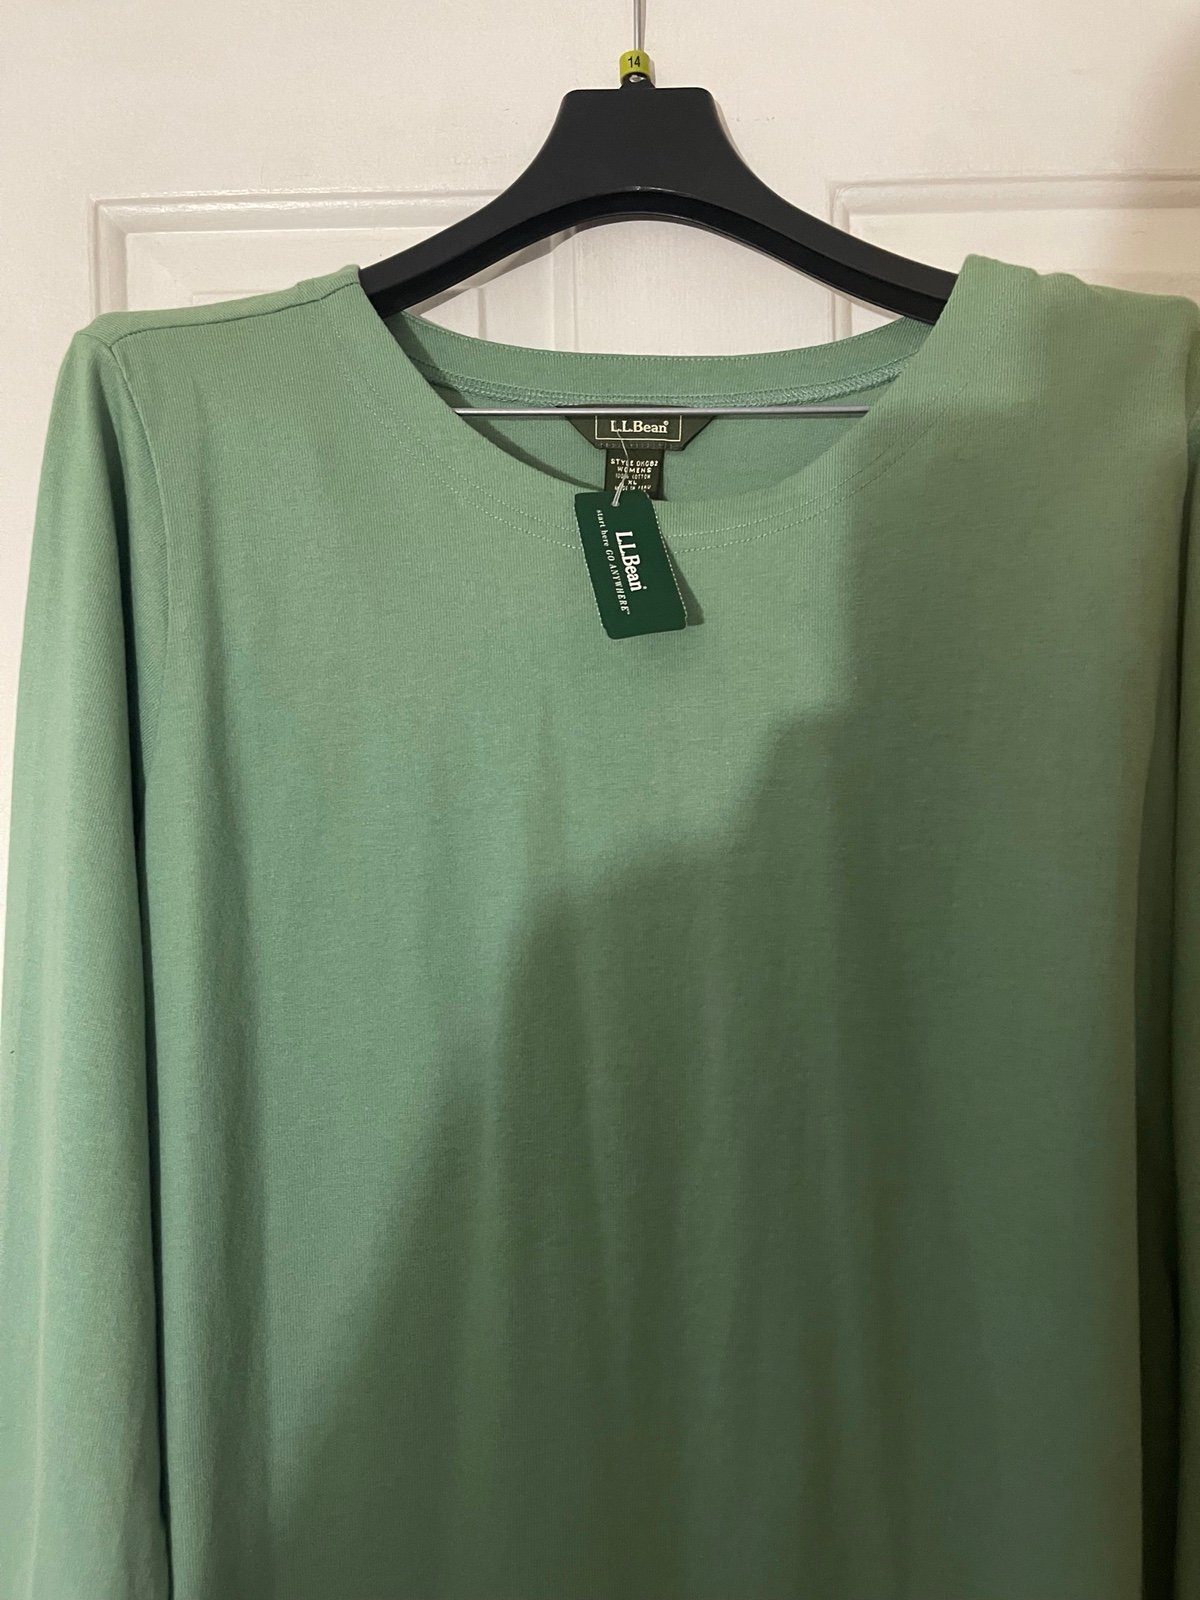 High quality L.L. Bean Woman’s Cotton Pullover New With Tags ! Size XL nPowuqa4V just for you